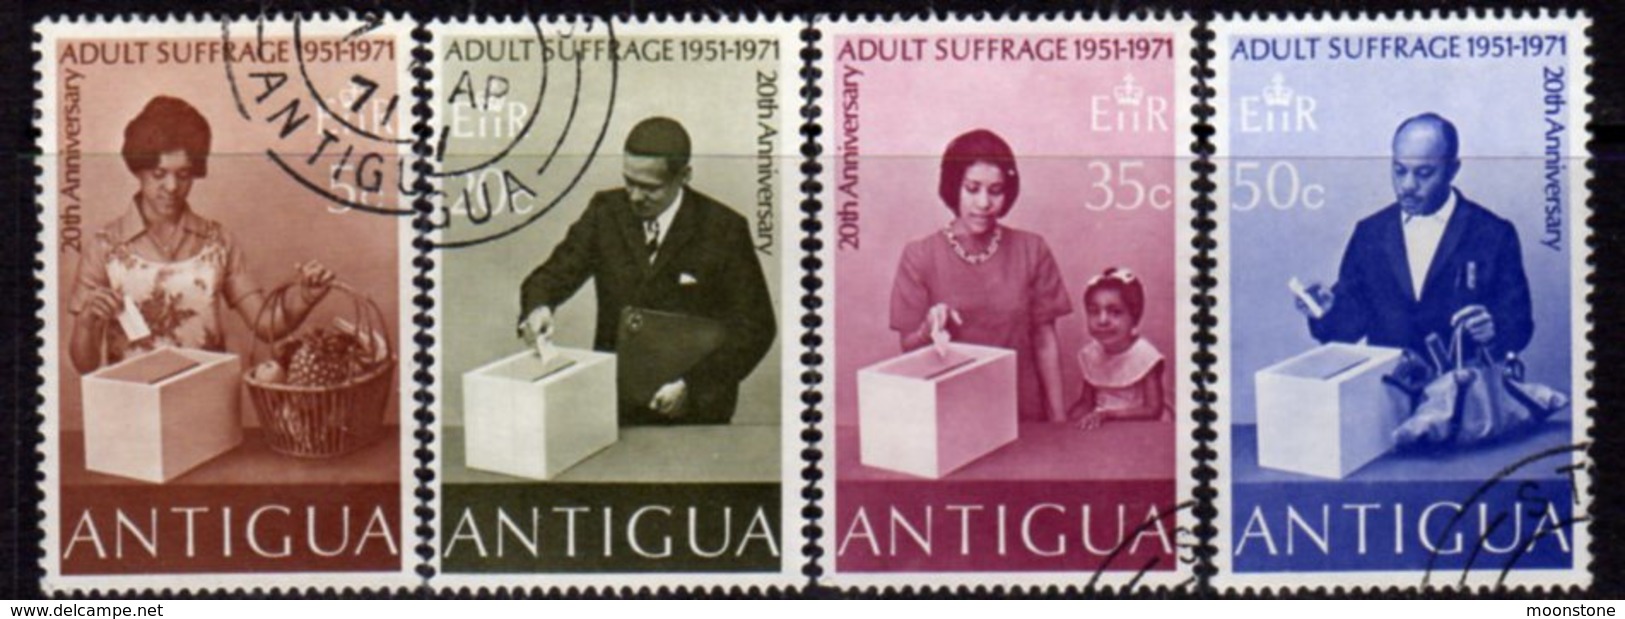 Antigua 1971 20th Anniversary Of Adult Suffrage Set Of 4, Used, SG 296/9 - 1960-1981 Autonomie Interne